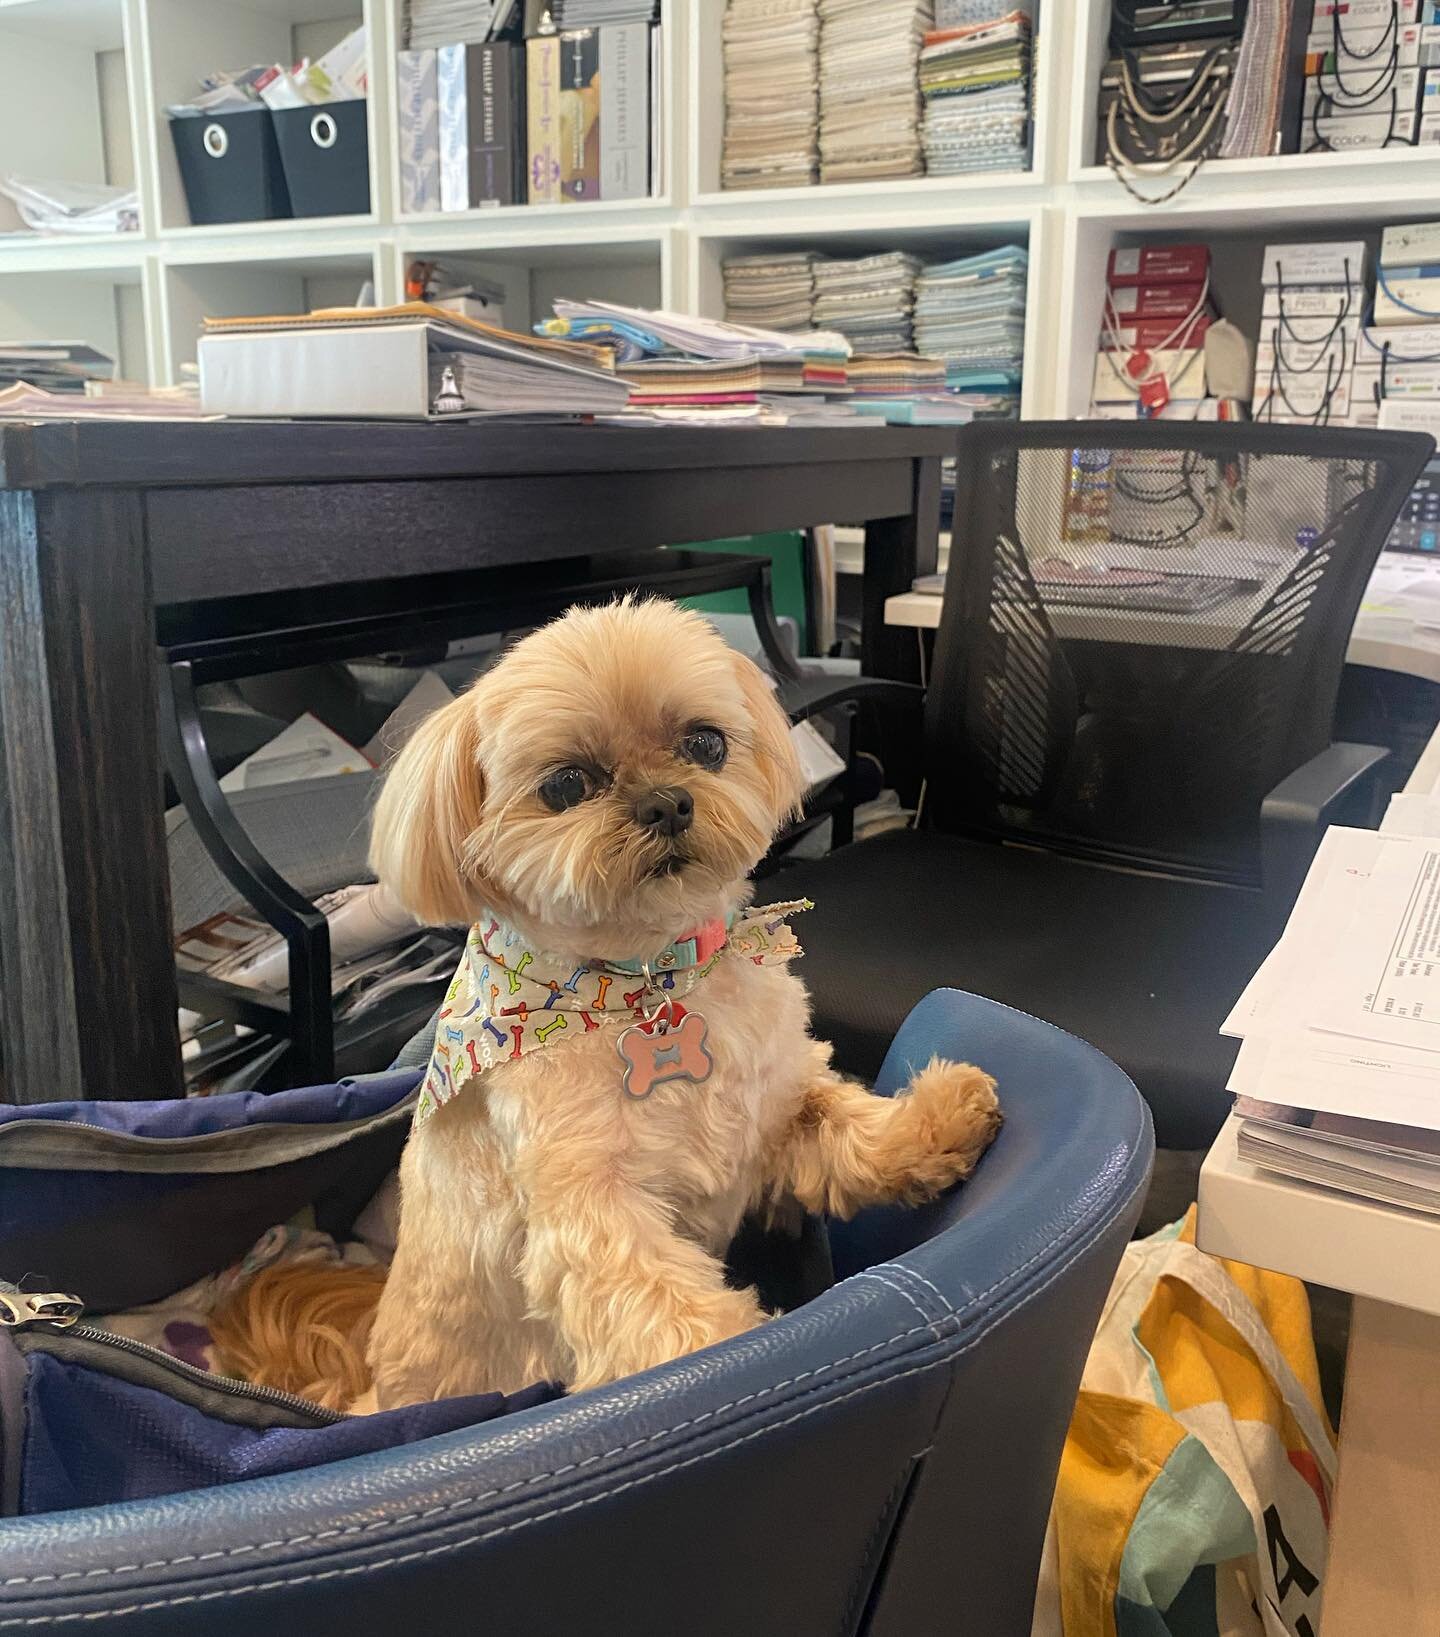 Everyone meet Holly! The occasional office pup that comes in to help🐶How cute is she? 

#officeanimals #officepup #erinblosserallen #interiordesign #workmotivation #designsarasota